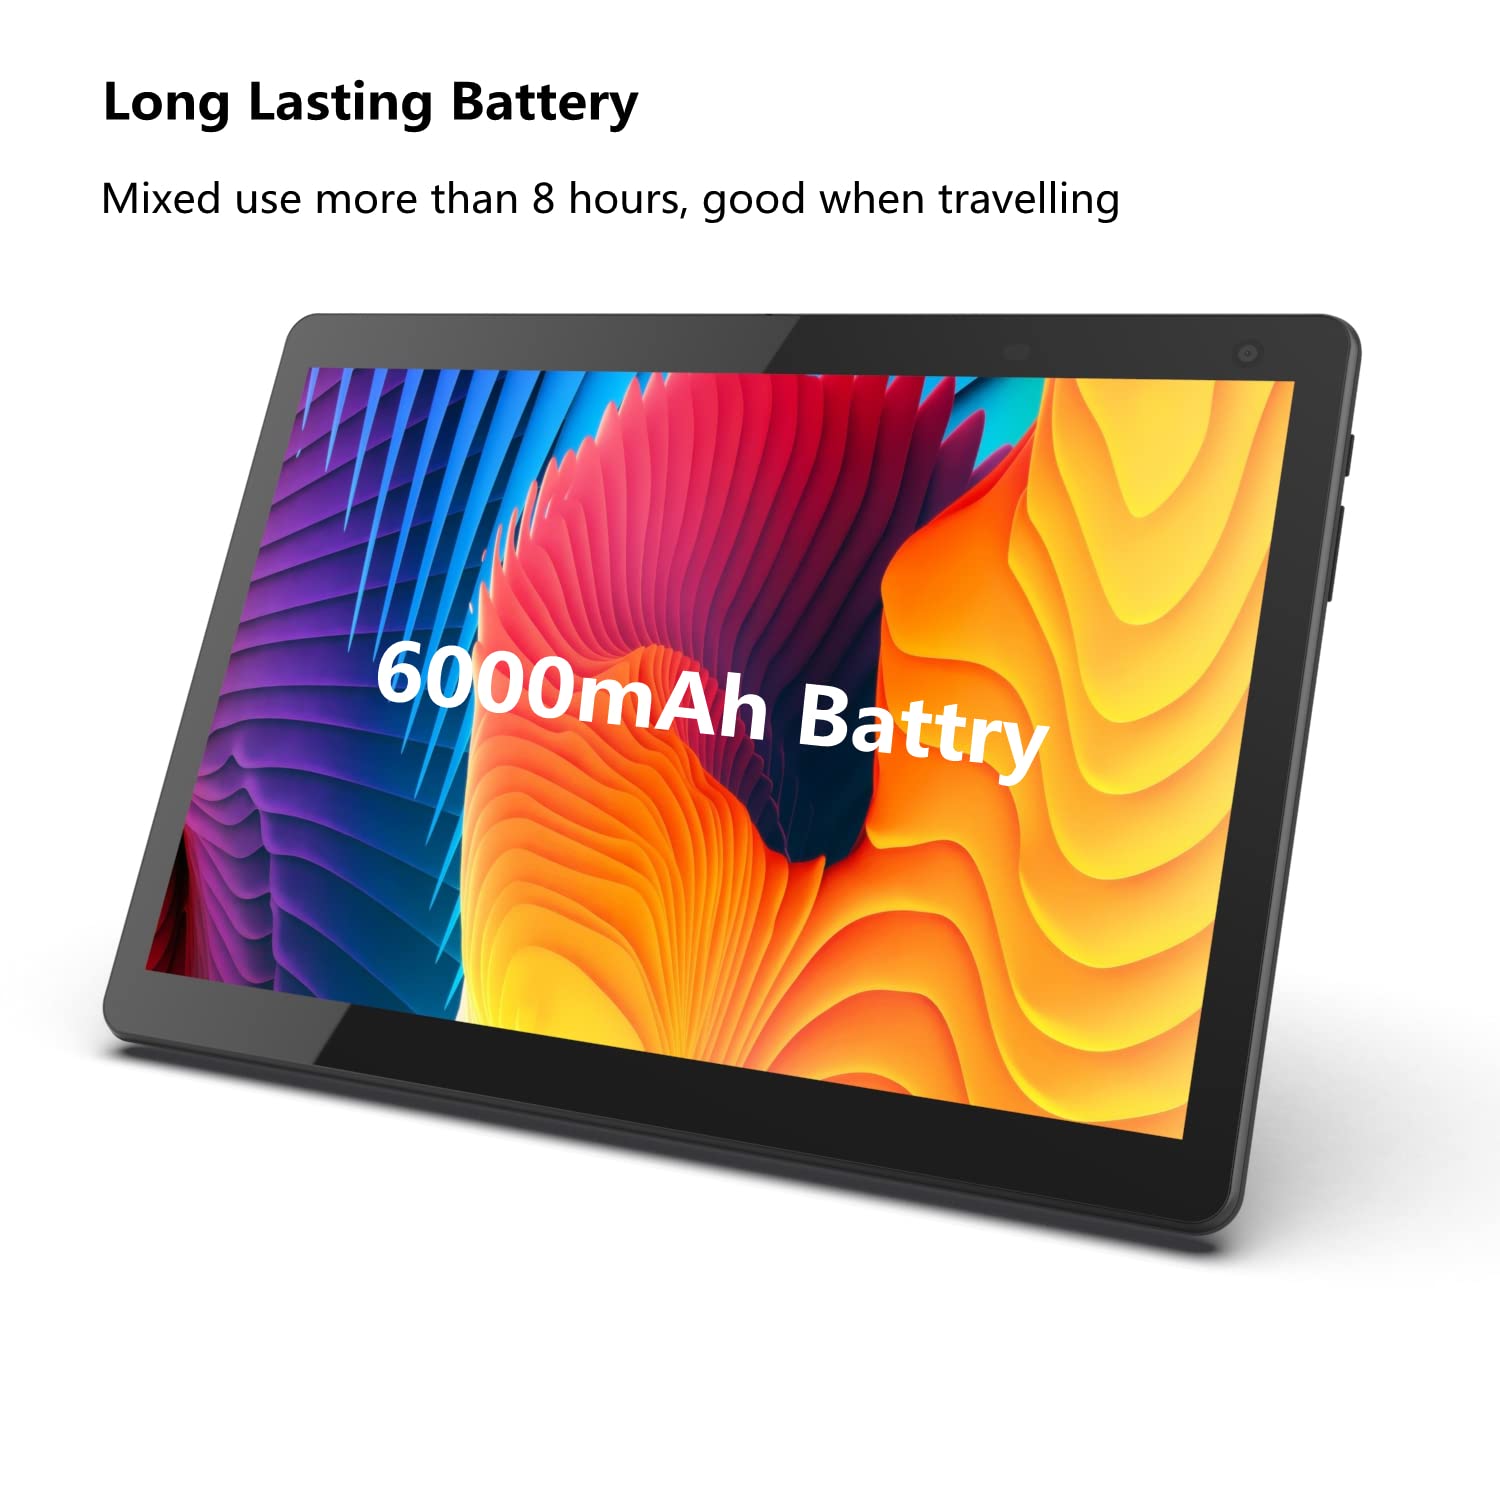 COOPERS Tablet 10 inch, Tablets Android 10.0, Quad-Core Processor 32GB Storage Tablet Computer, 2GB RAM, 8MP Camera, AM, FM, WiFi, IPS Screen 6000mAh Long Battery Life Tableta